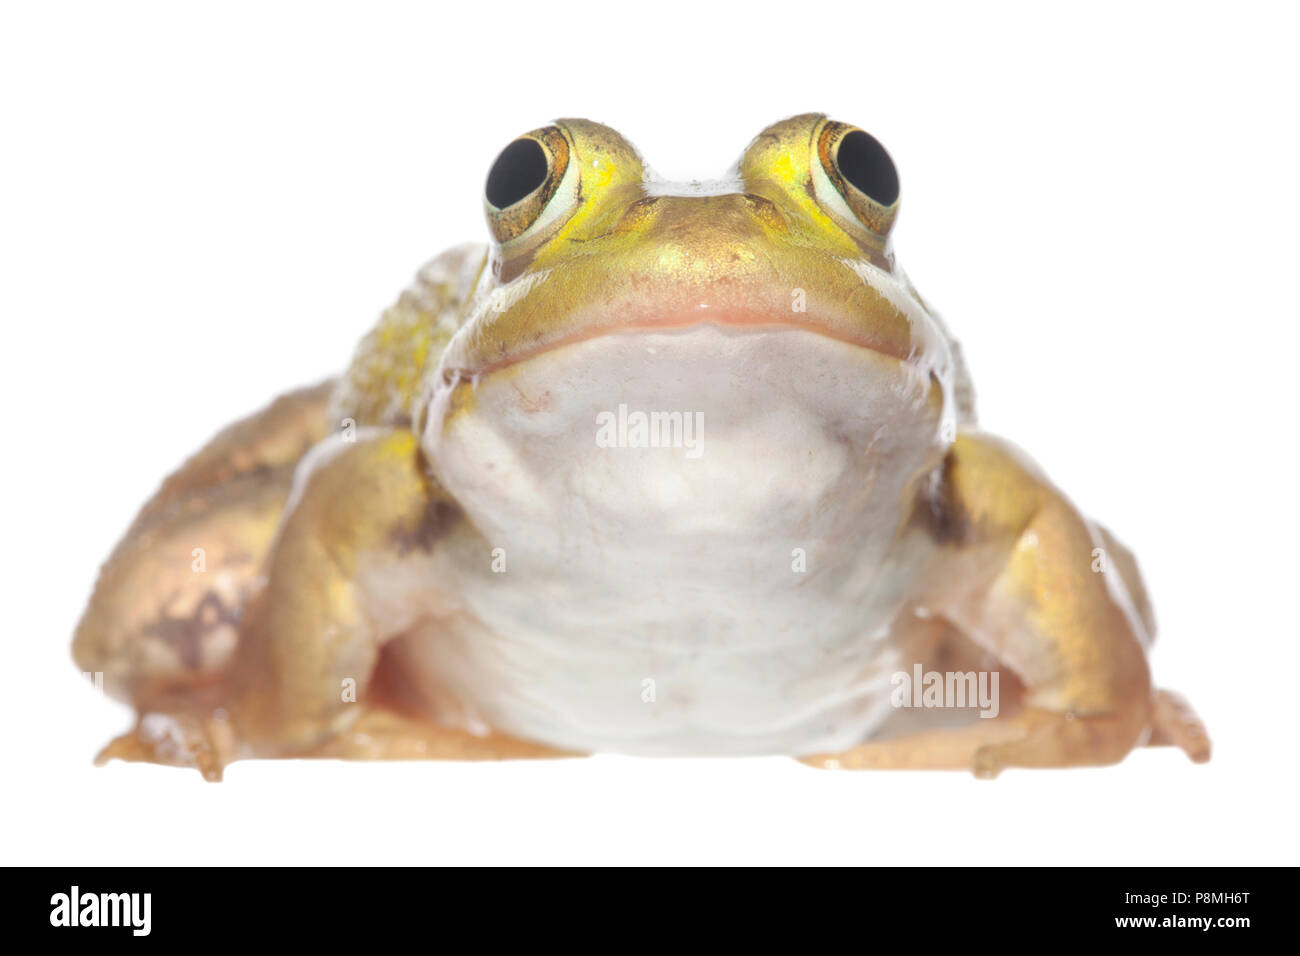 pool frog isolated against a white background Stock Photo